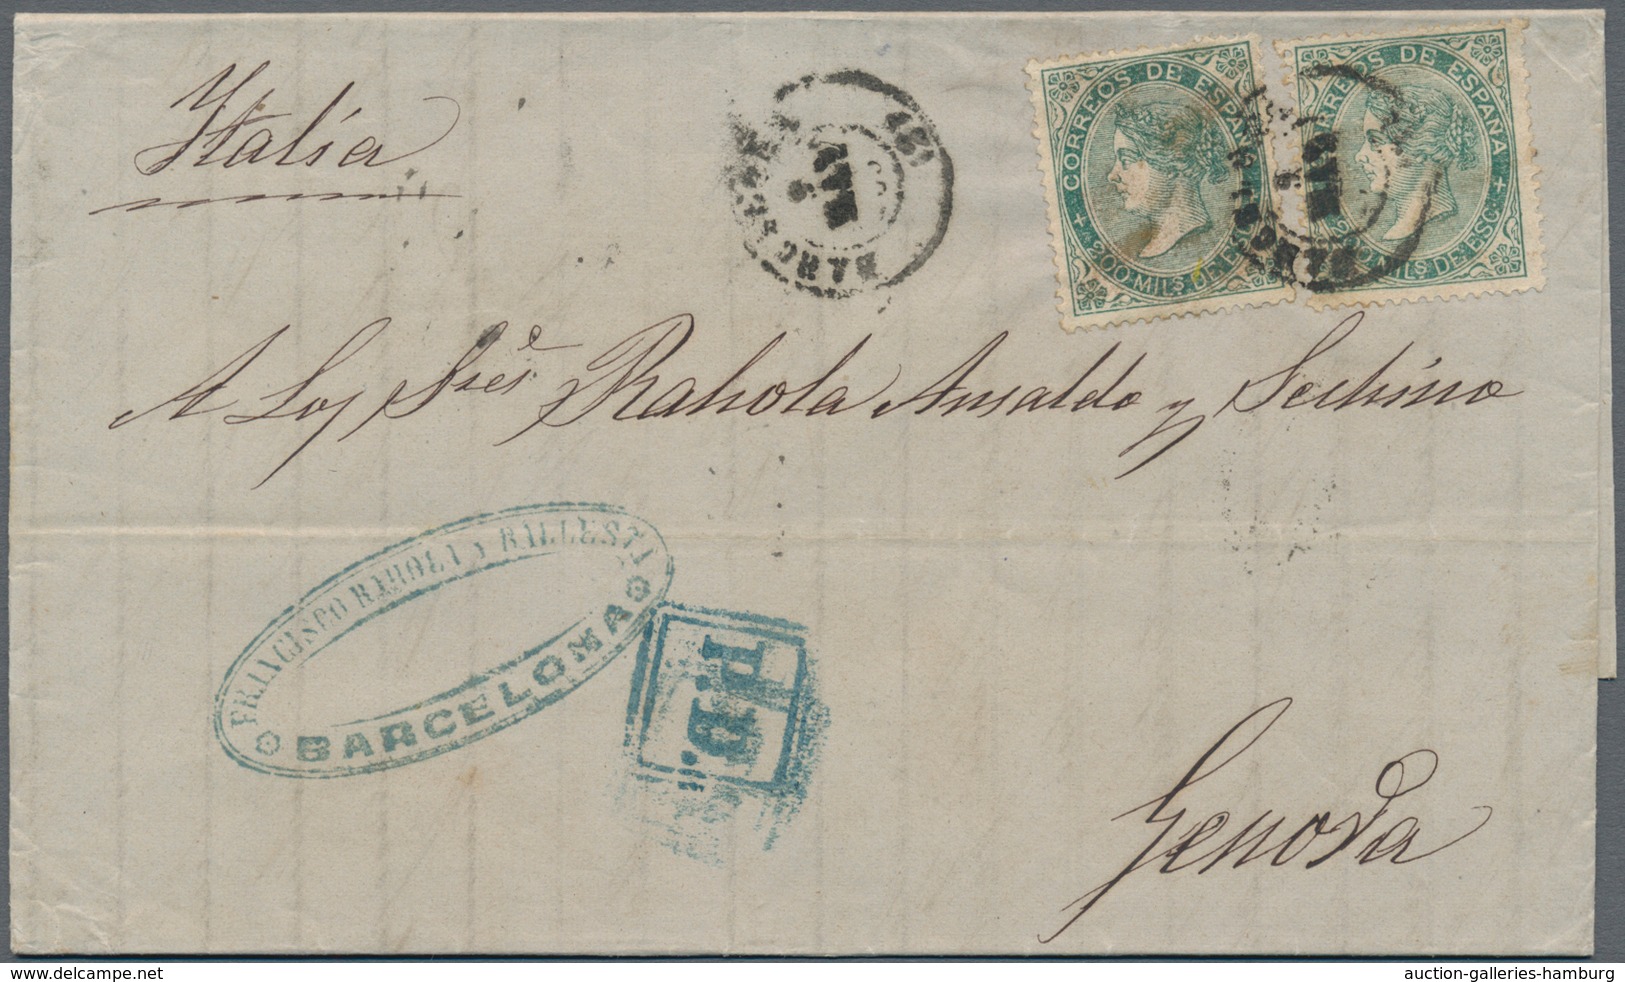 Spanien: 1868/1975 (ca.), sophisticated lot of ca. 110 covers sent from different Spanish locations,